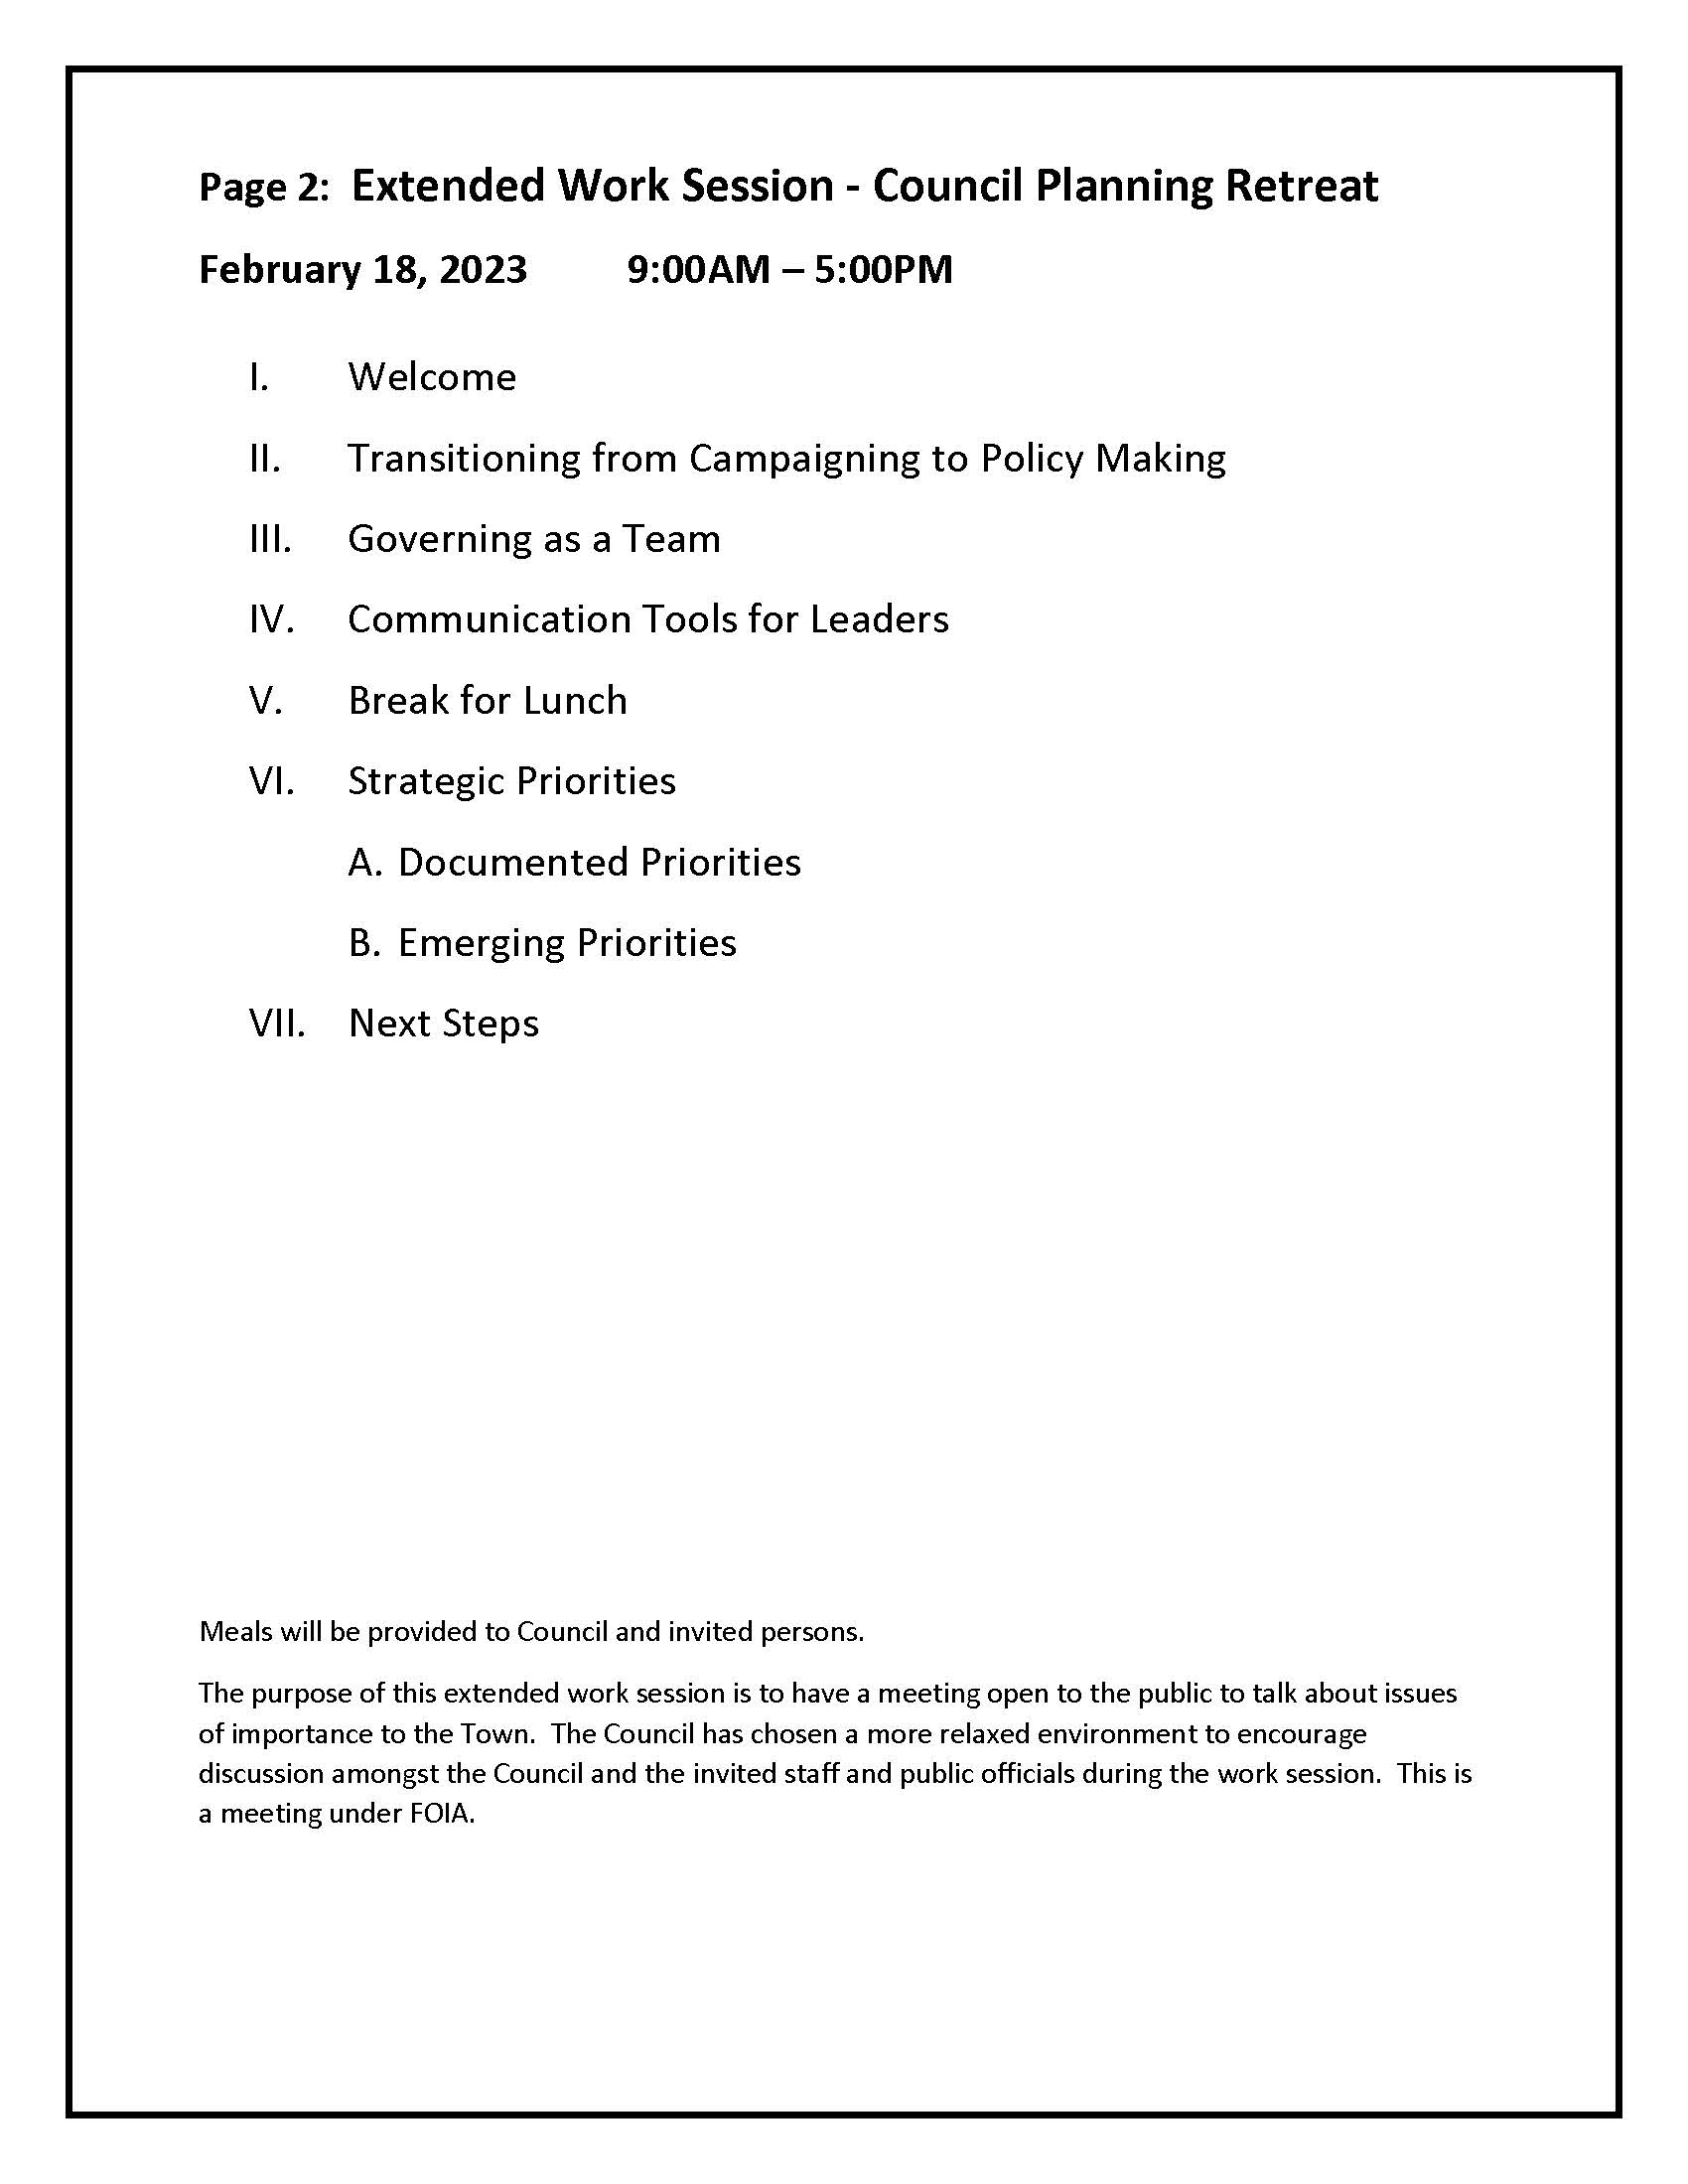 Town of Dumfries - Extended Worksession Agenda_Page_2